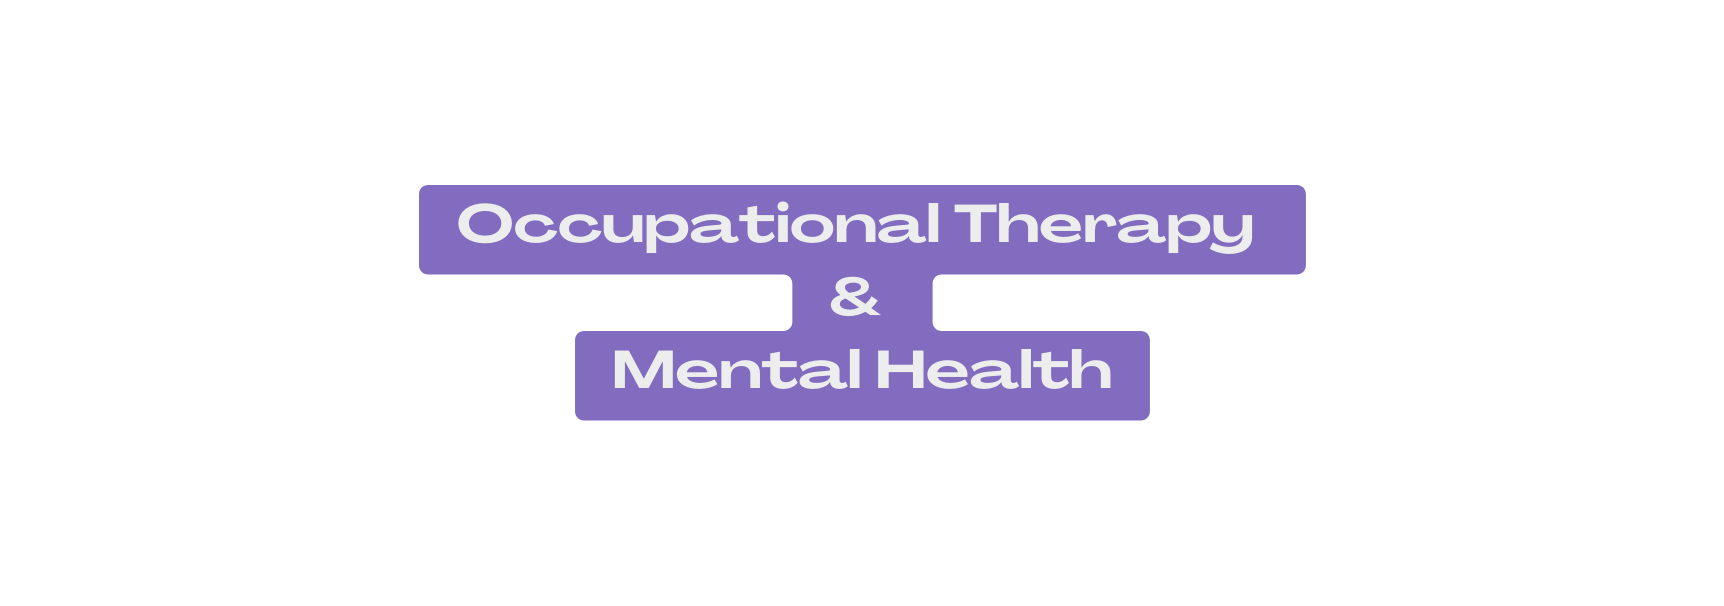 Occupational Therapy Mental Health